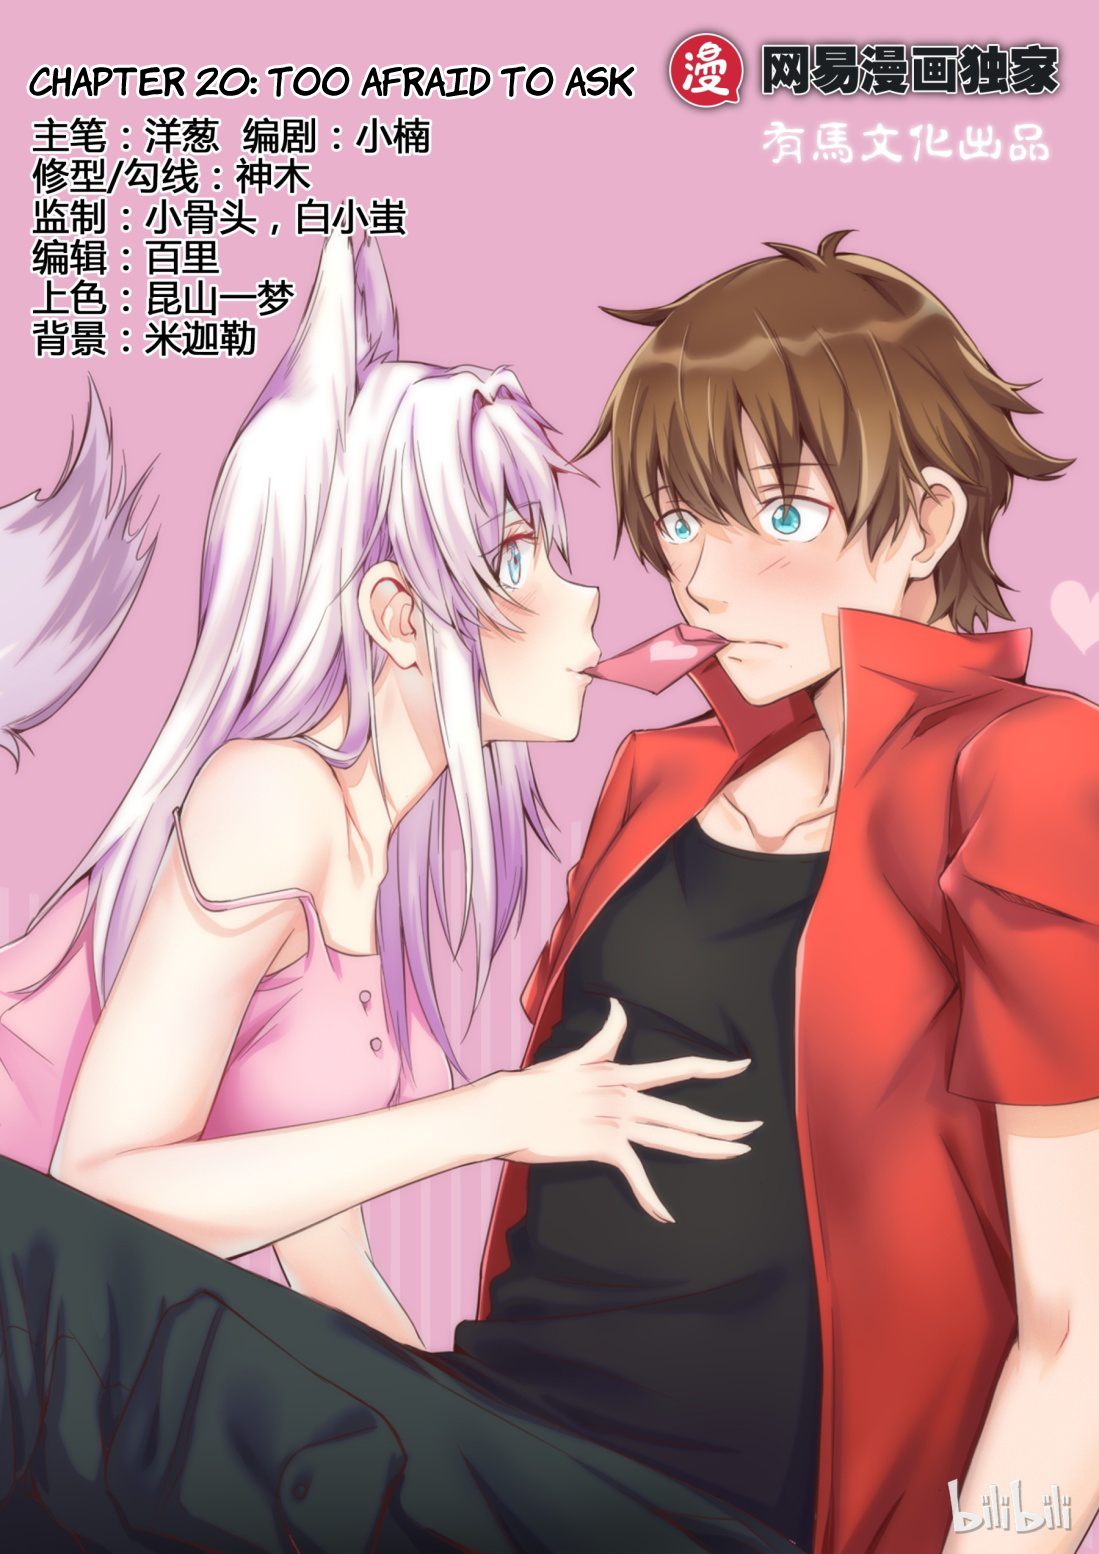 My Wife Is A Fox Spirit Ch. 20 Too Afraid to ask